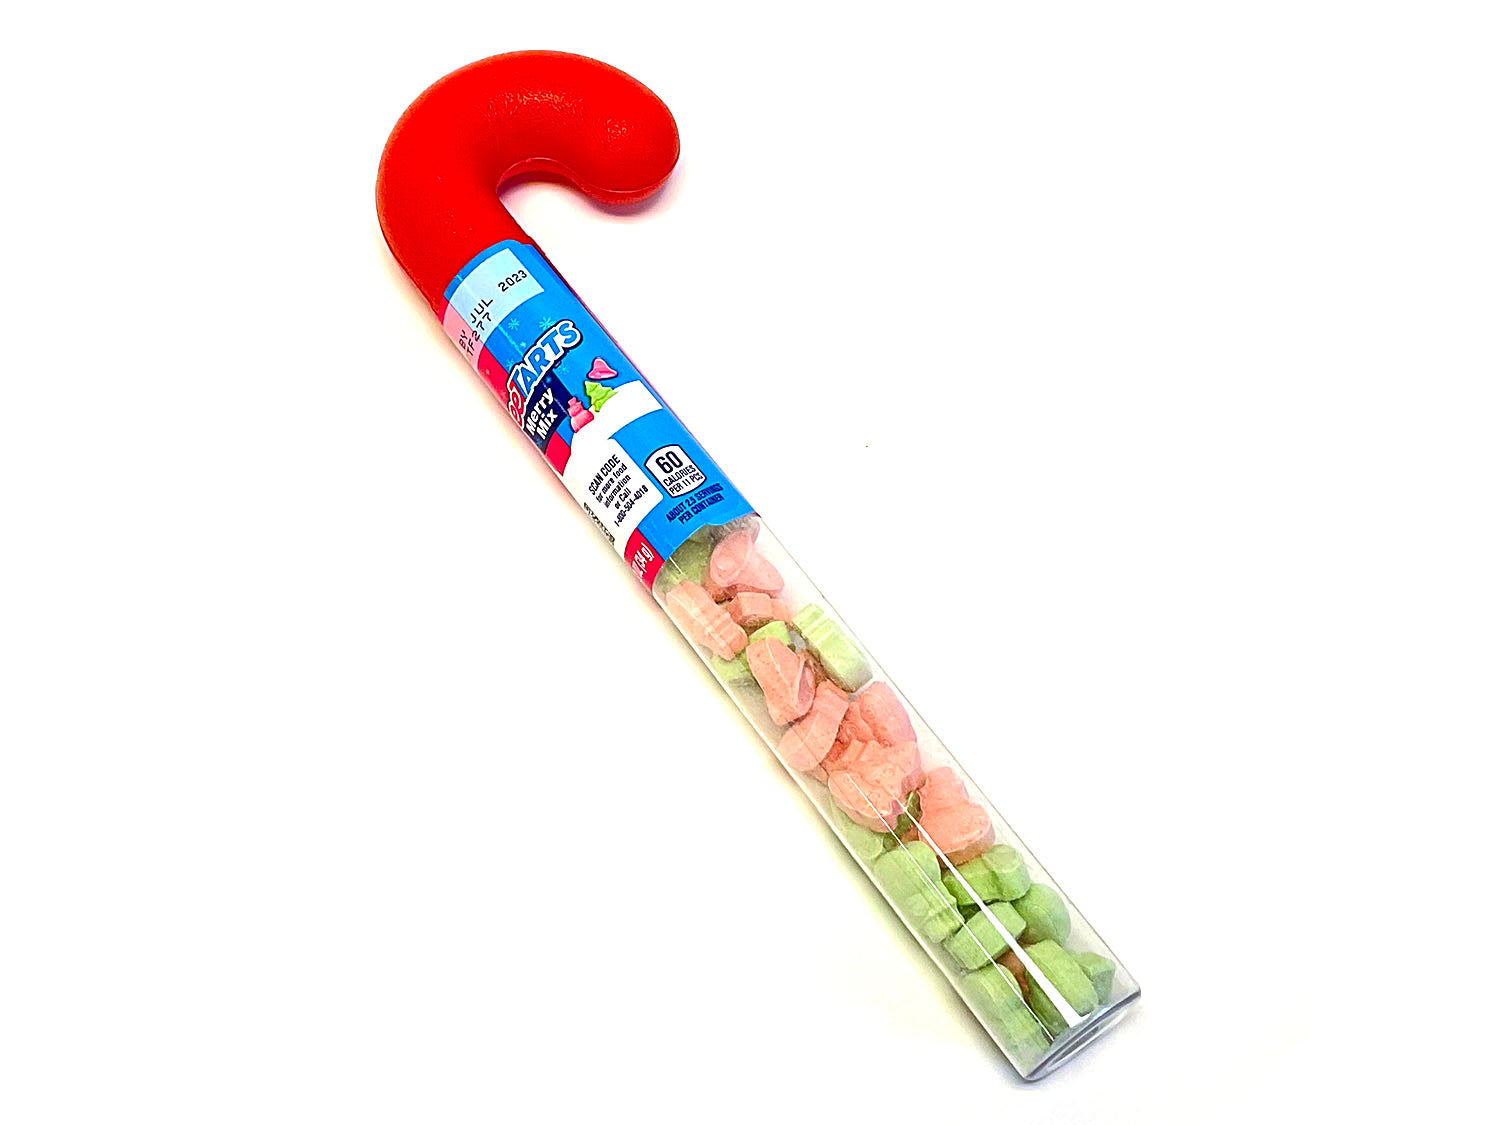 Candy Cane filled with Sweetarts - 1.2 oz 9 inch